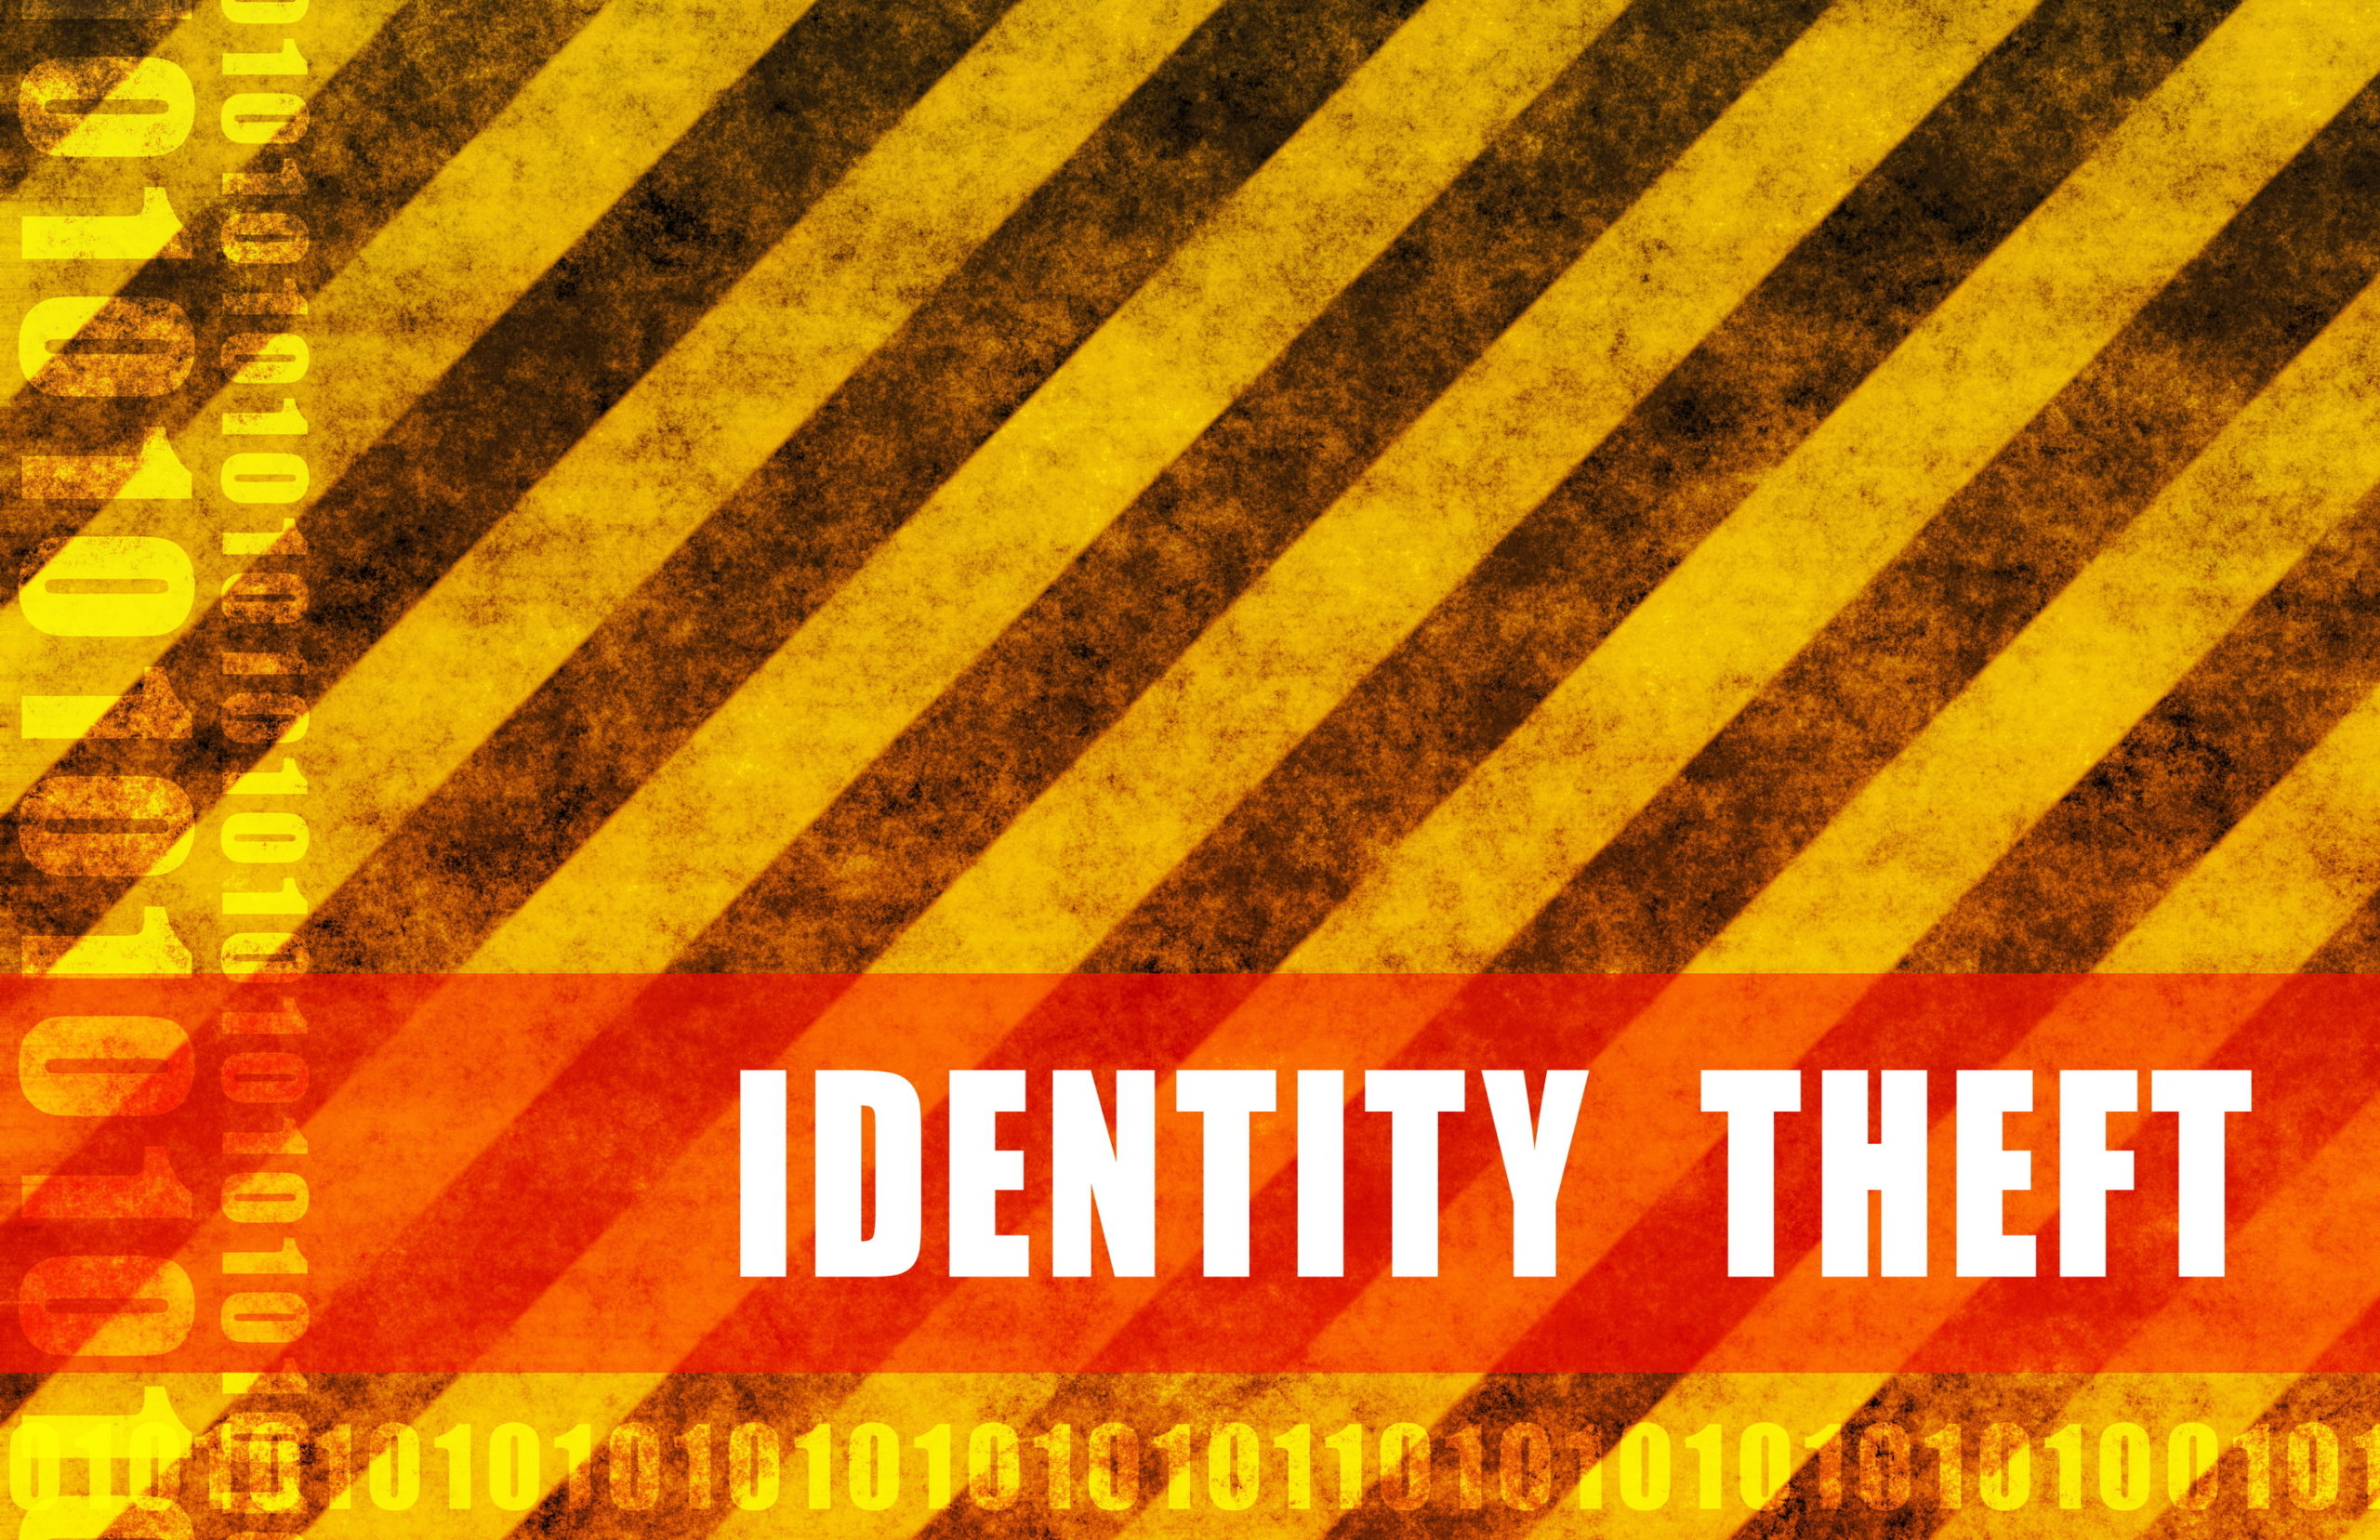 Slide Show: Lower Your Risk for Identity Theft